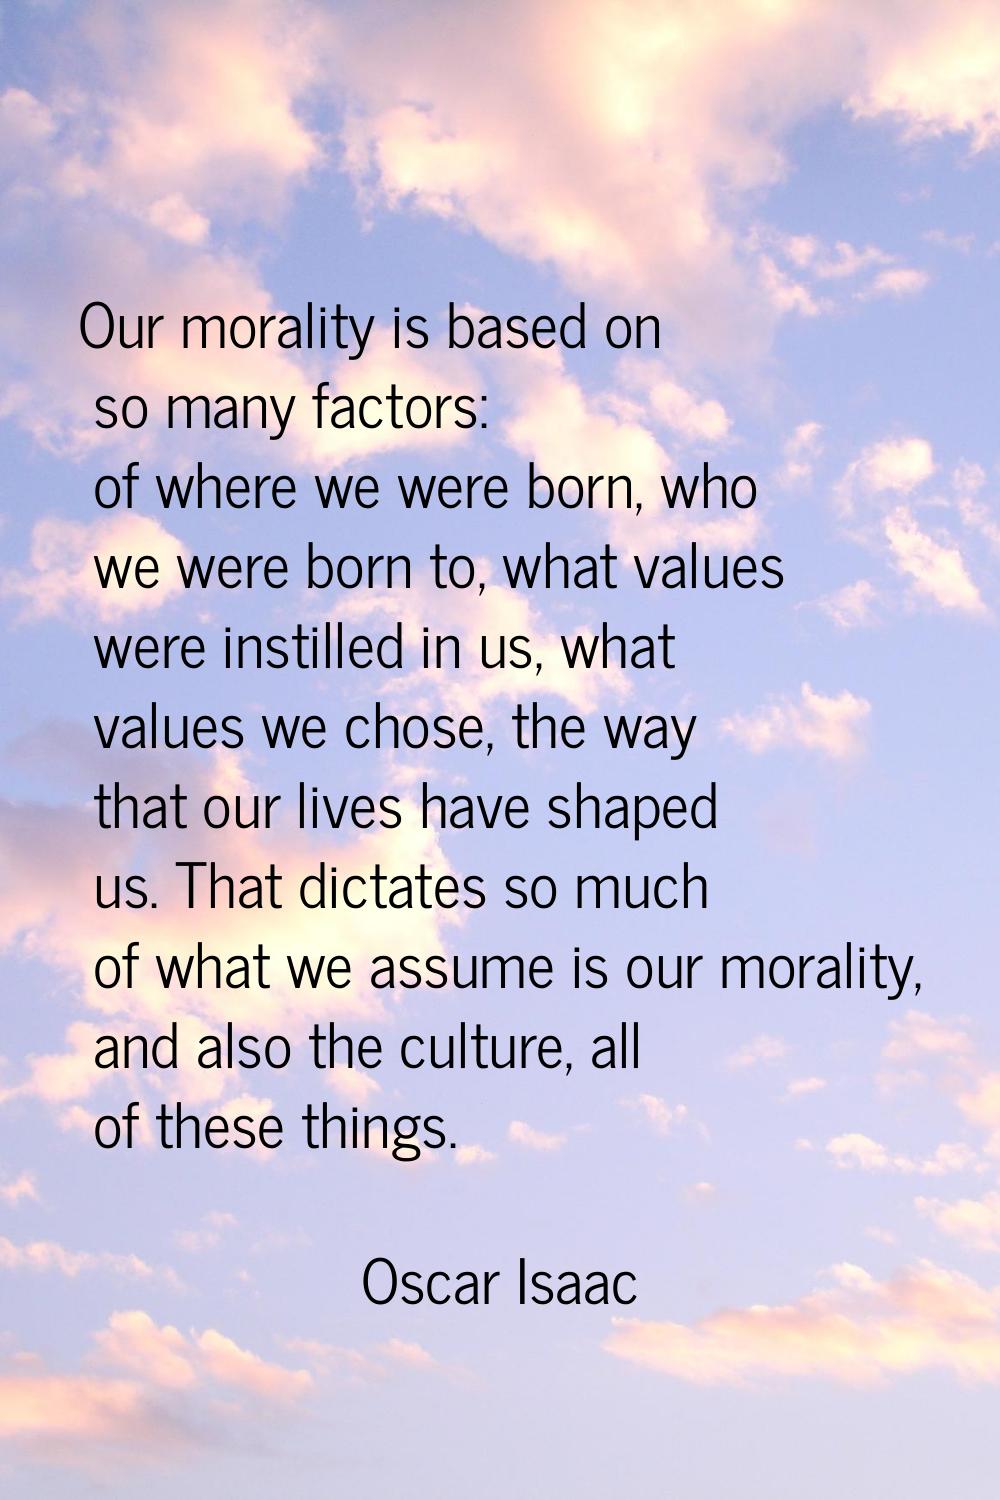 Our morality is based on so many factors: of where we were born, who we were born to, what values w